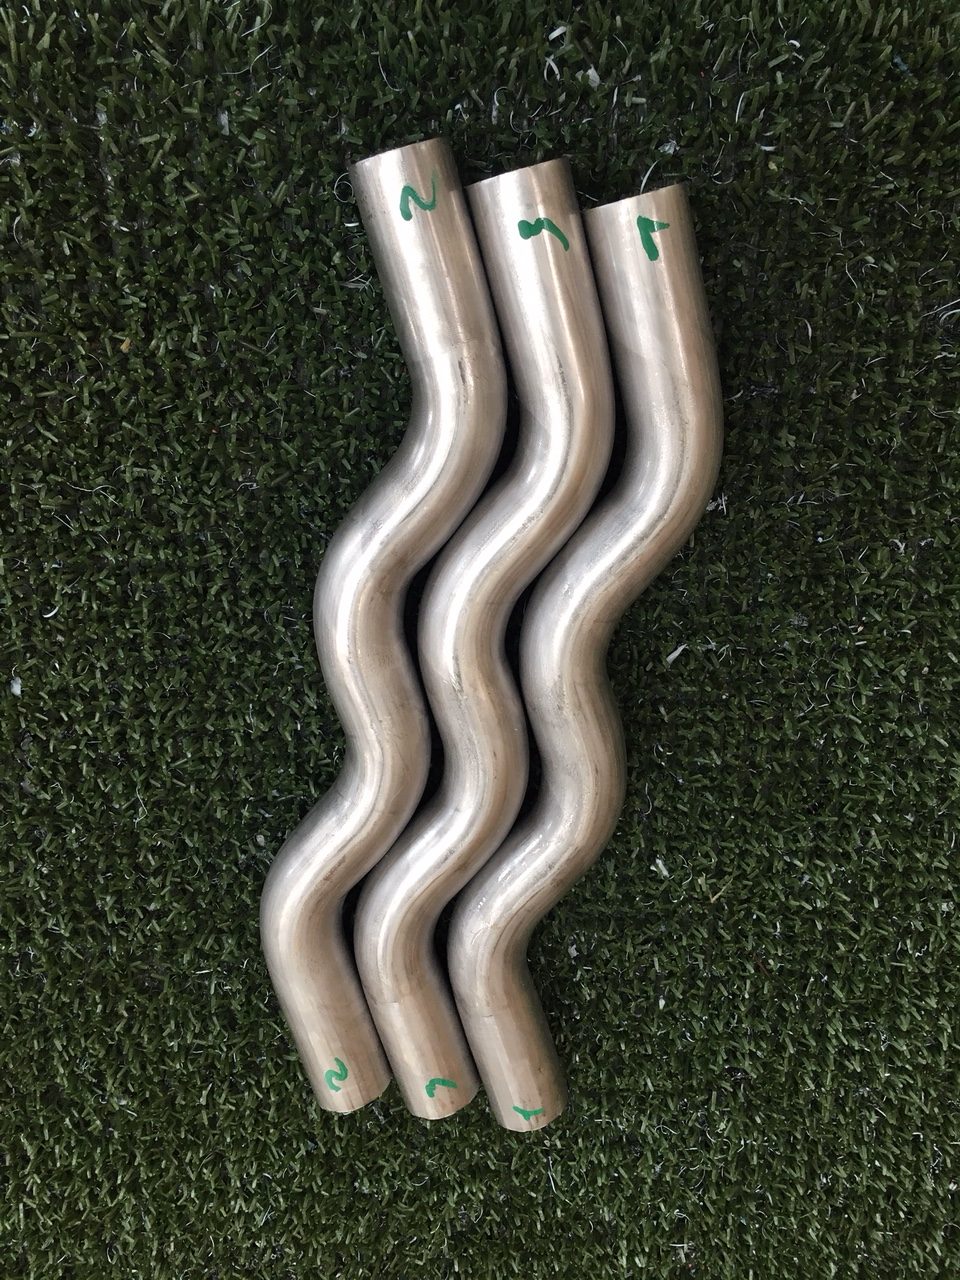 For the hydroforming of short lenght pipes, one good solution is to hydroform a snake!